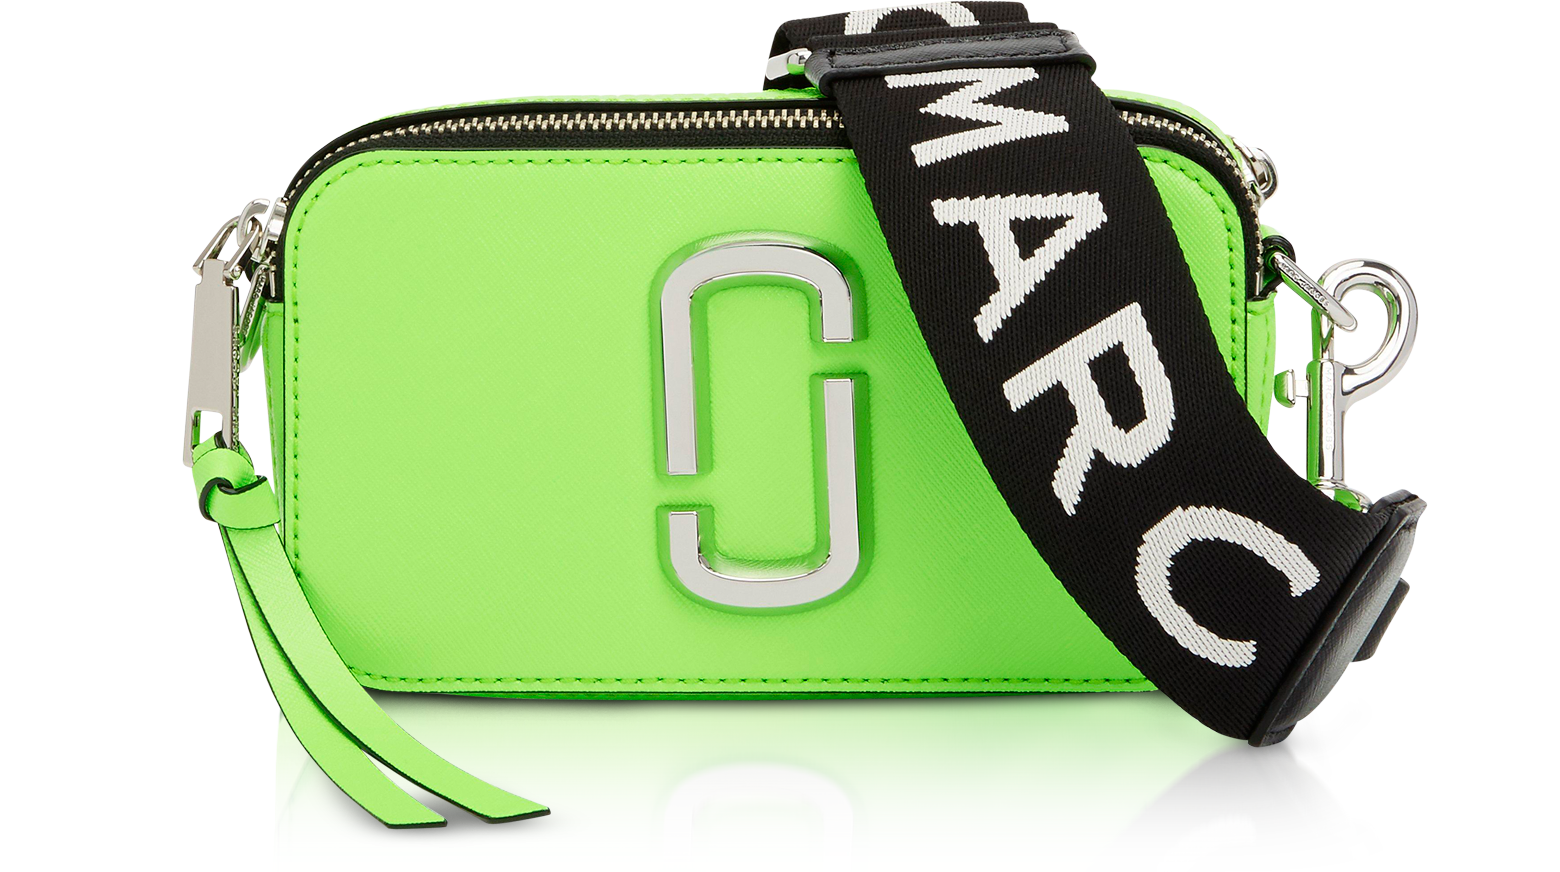 Marc Jacobs Snapshot Camera Bag in Green